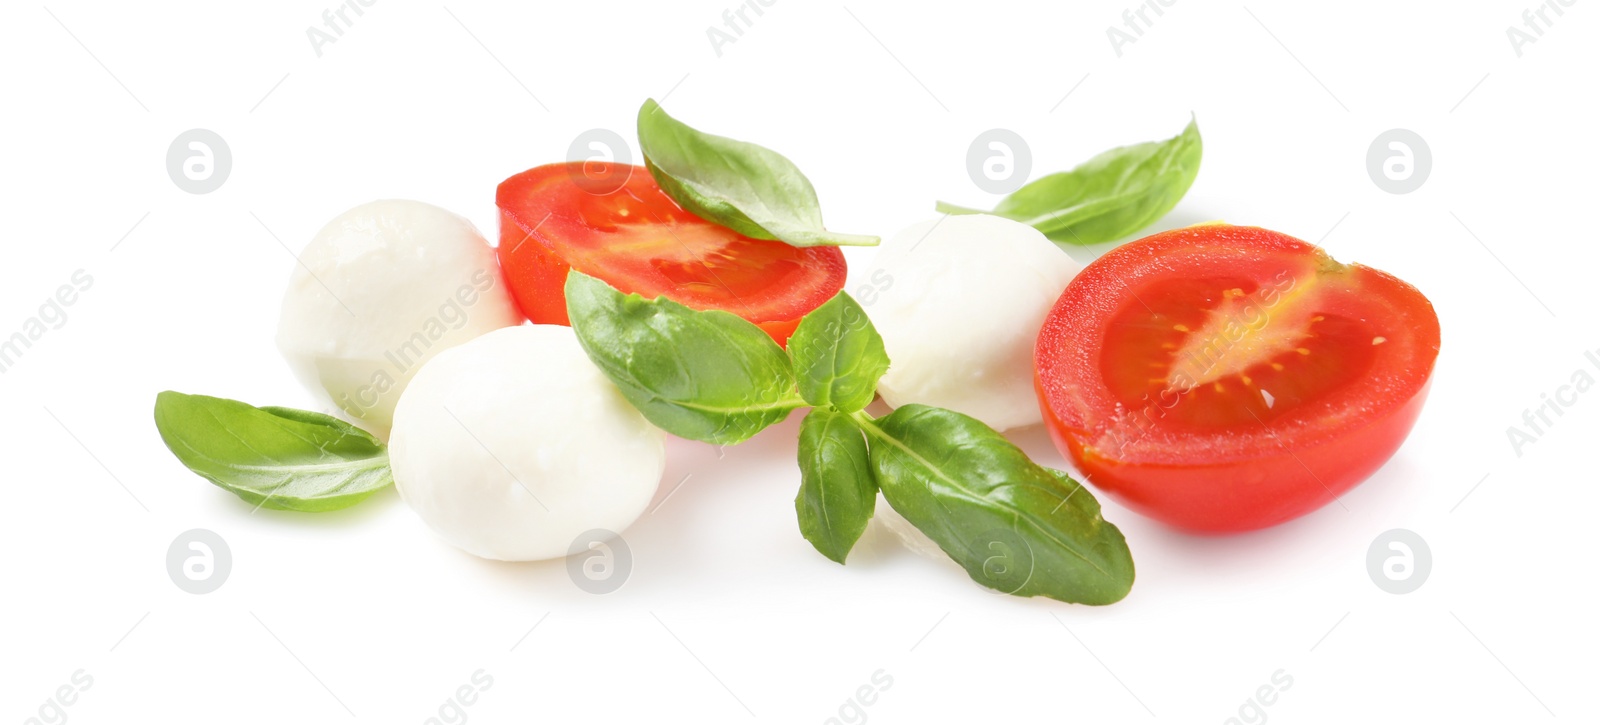 Photo of Delicious mozzarella, tomatoes and basil leaves on white background